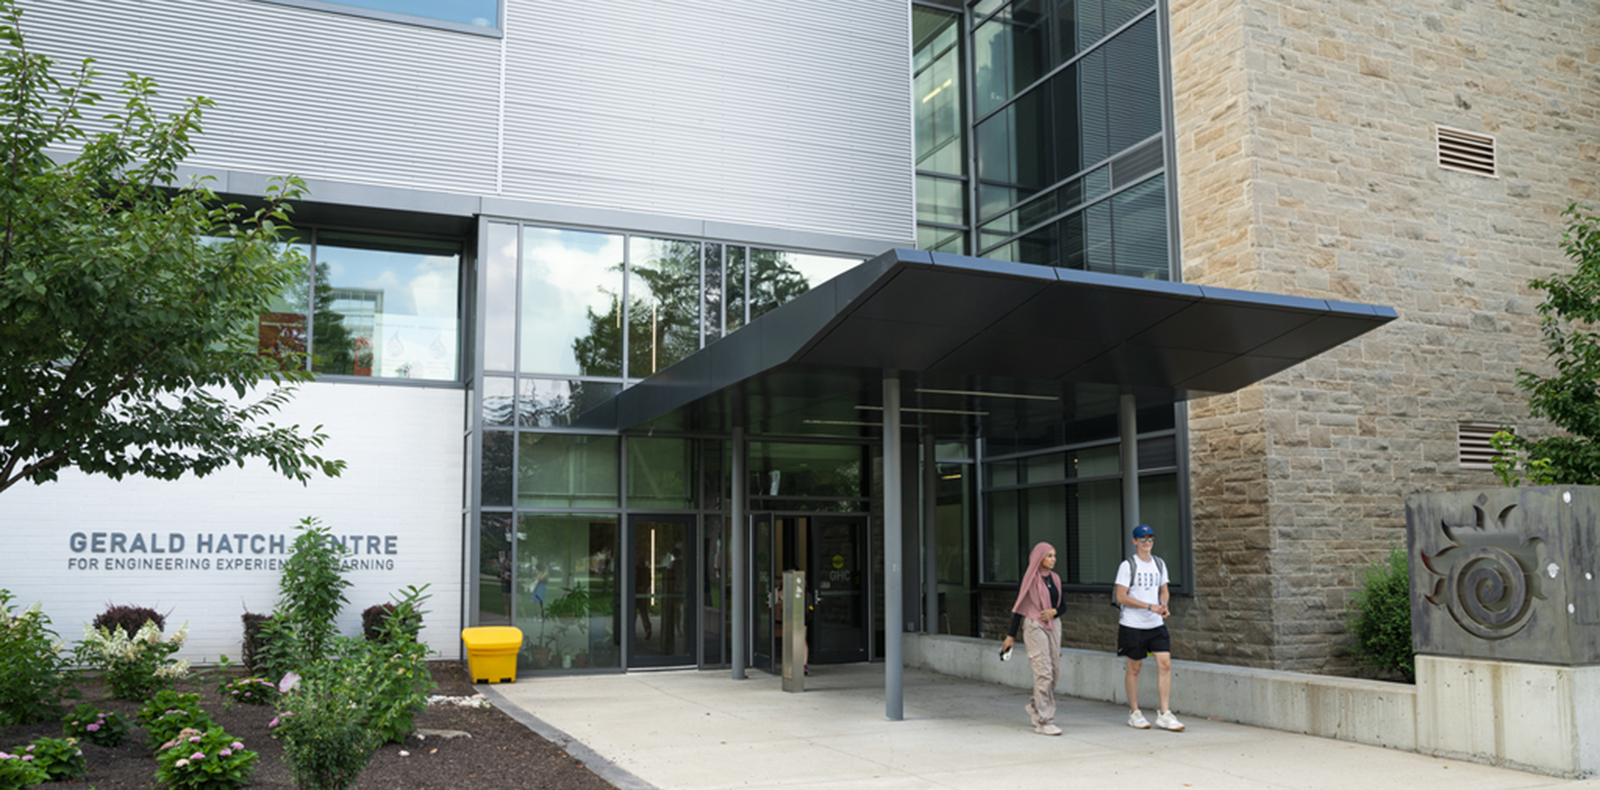 Hatch exterior with students walking